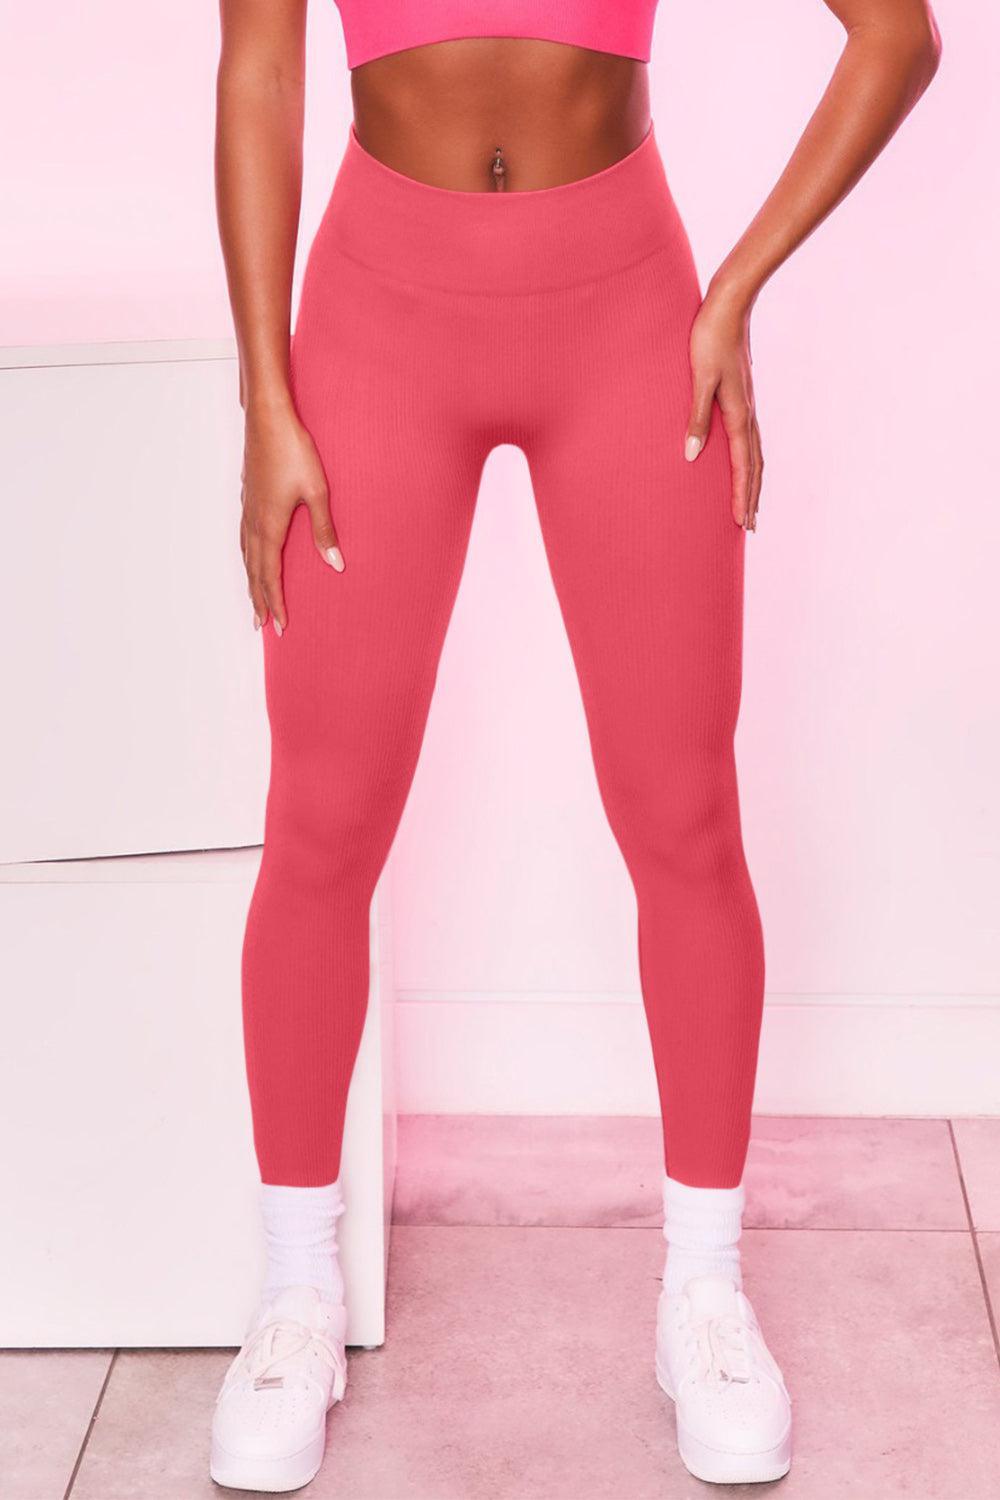 a woman in a pink sports bra top and pink leggings